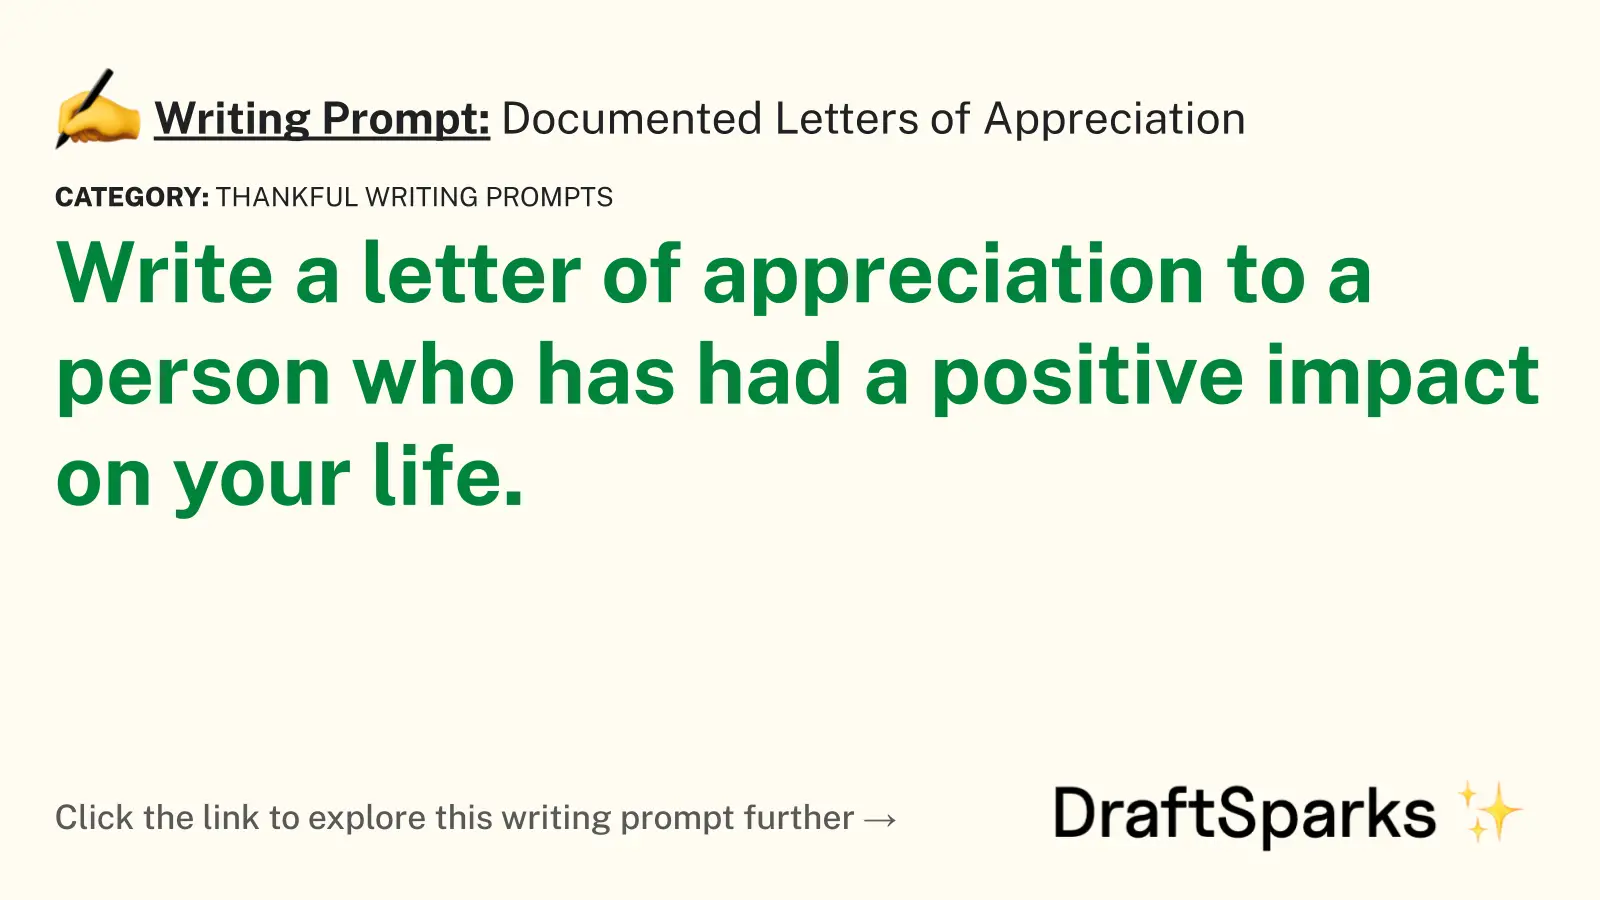 Documented Letters of Appreciation